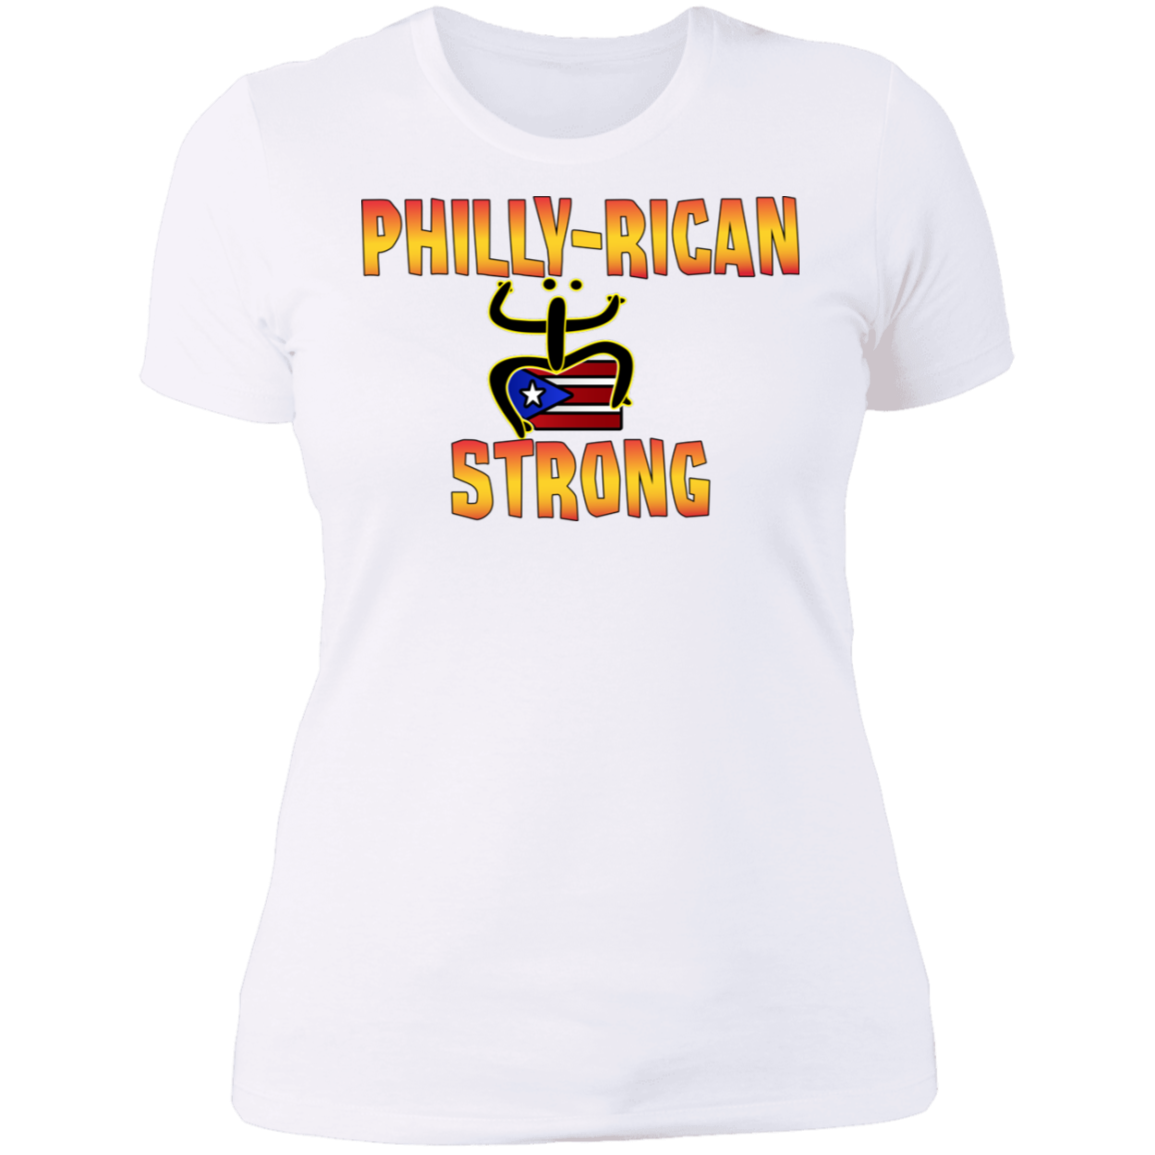 Philly-Rican Strong  Ladies' Boyfriend T-Shirt - Puerto Rican Pride